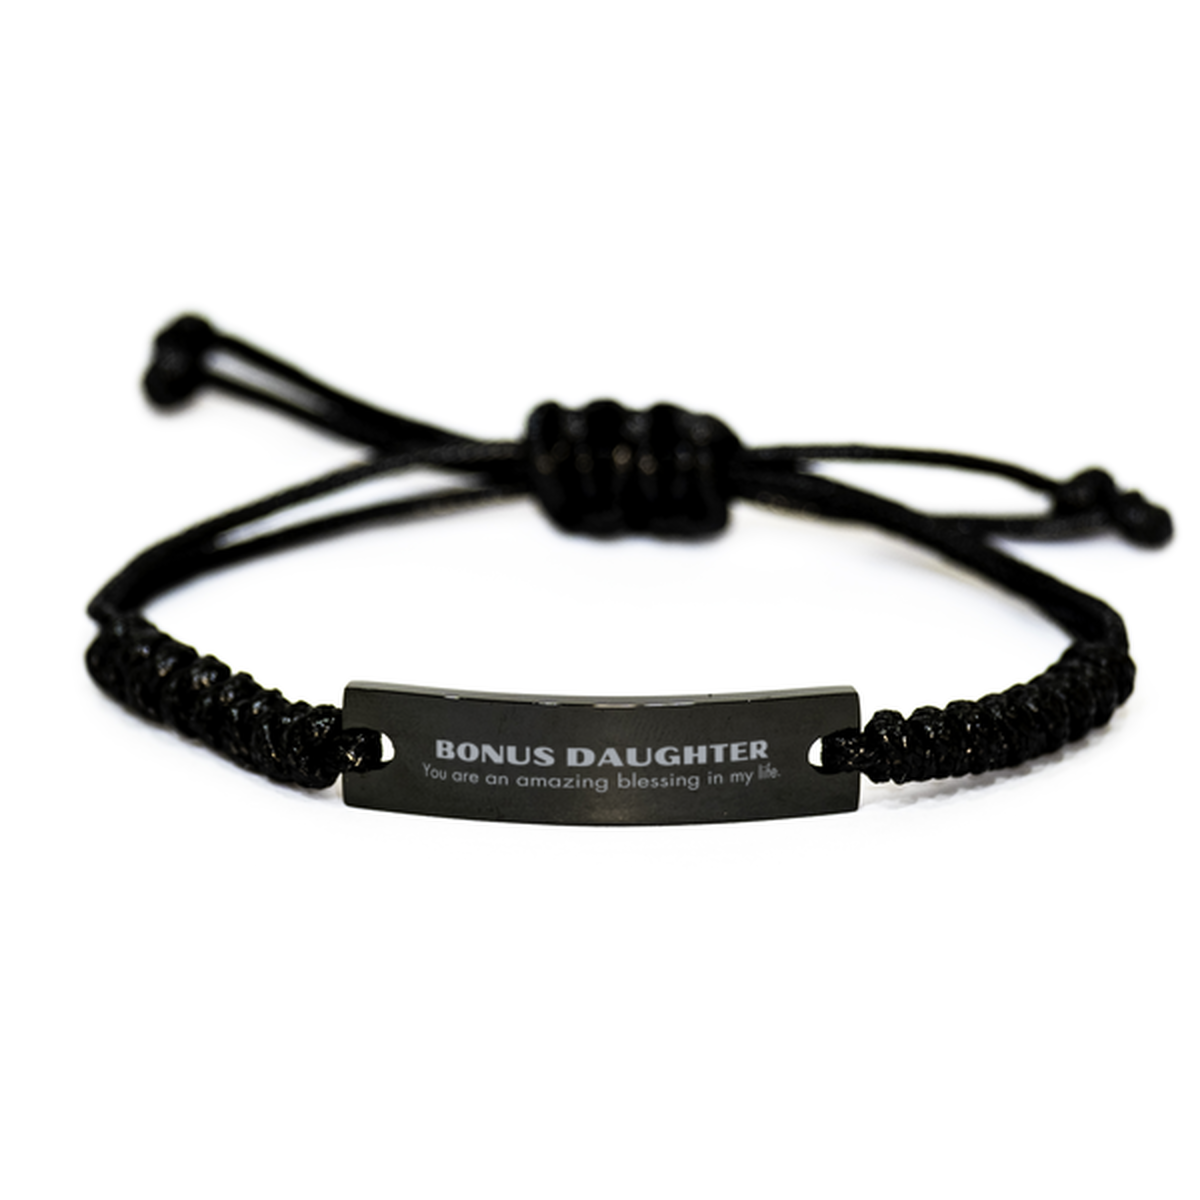 Bonus Daughter Black Rope Bracelet, You are an amazing blessing in my life, Thank You Gifts For Bonus Daughter, Inspirational Birthday Christmas Unique Gifts For Bonus Daughter